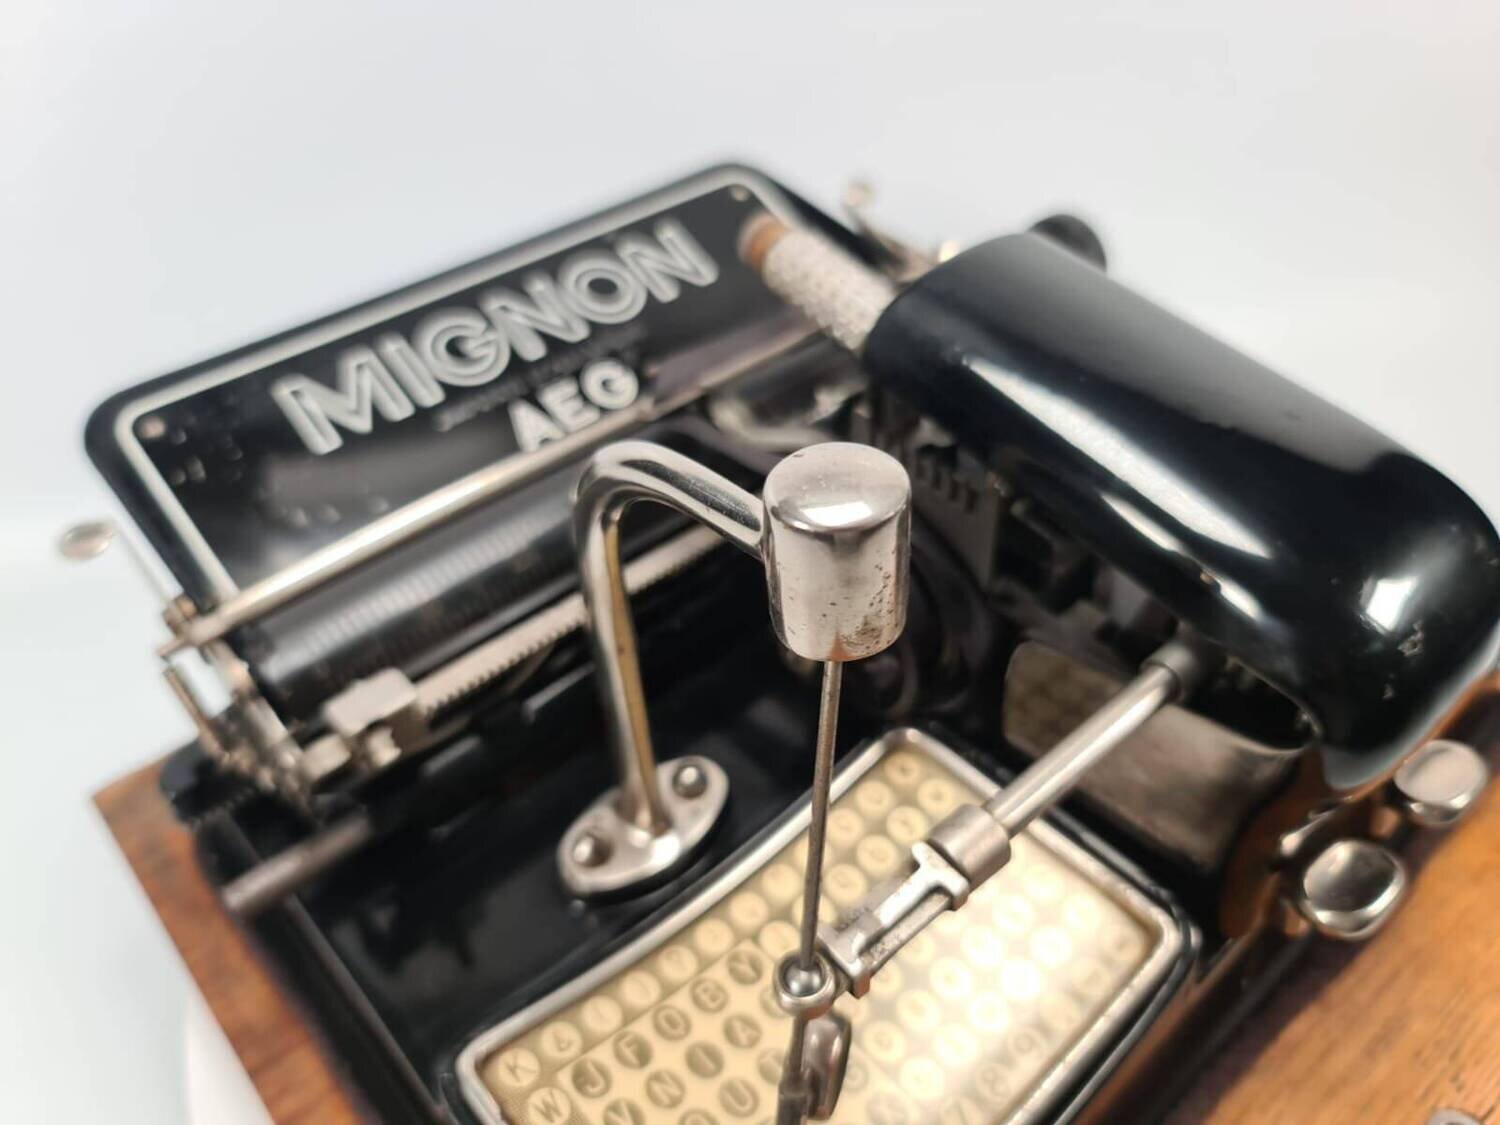 Mignon Nº4 Index Typewriter w/Accessories, Vintage, Portable, Professionally Serviced by Typewriter.Company